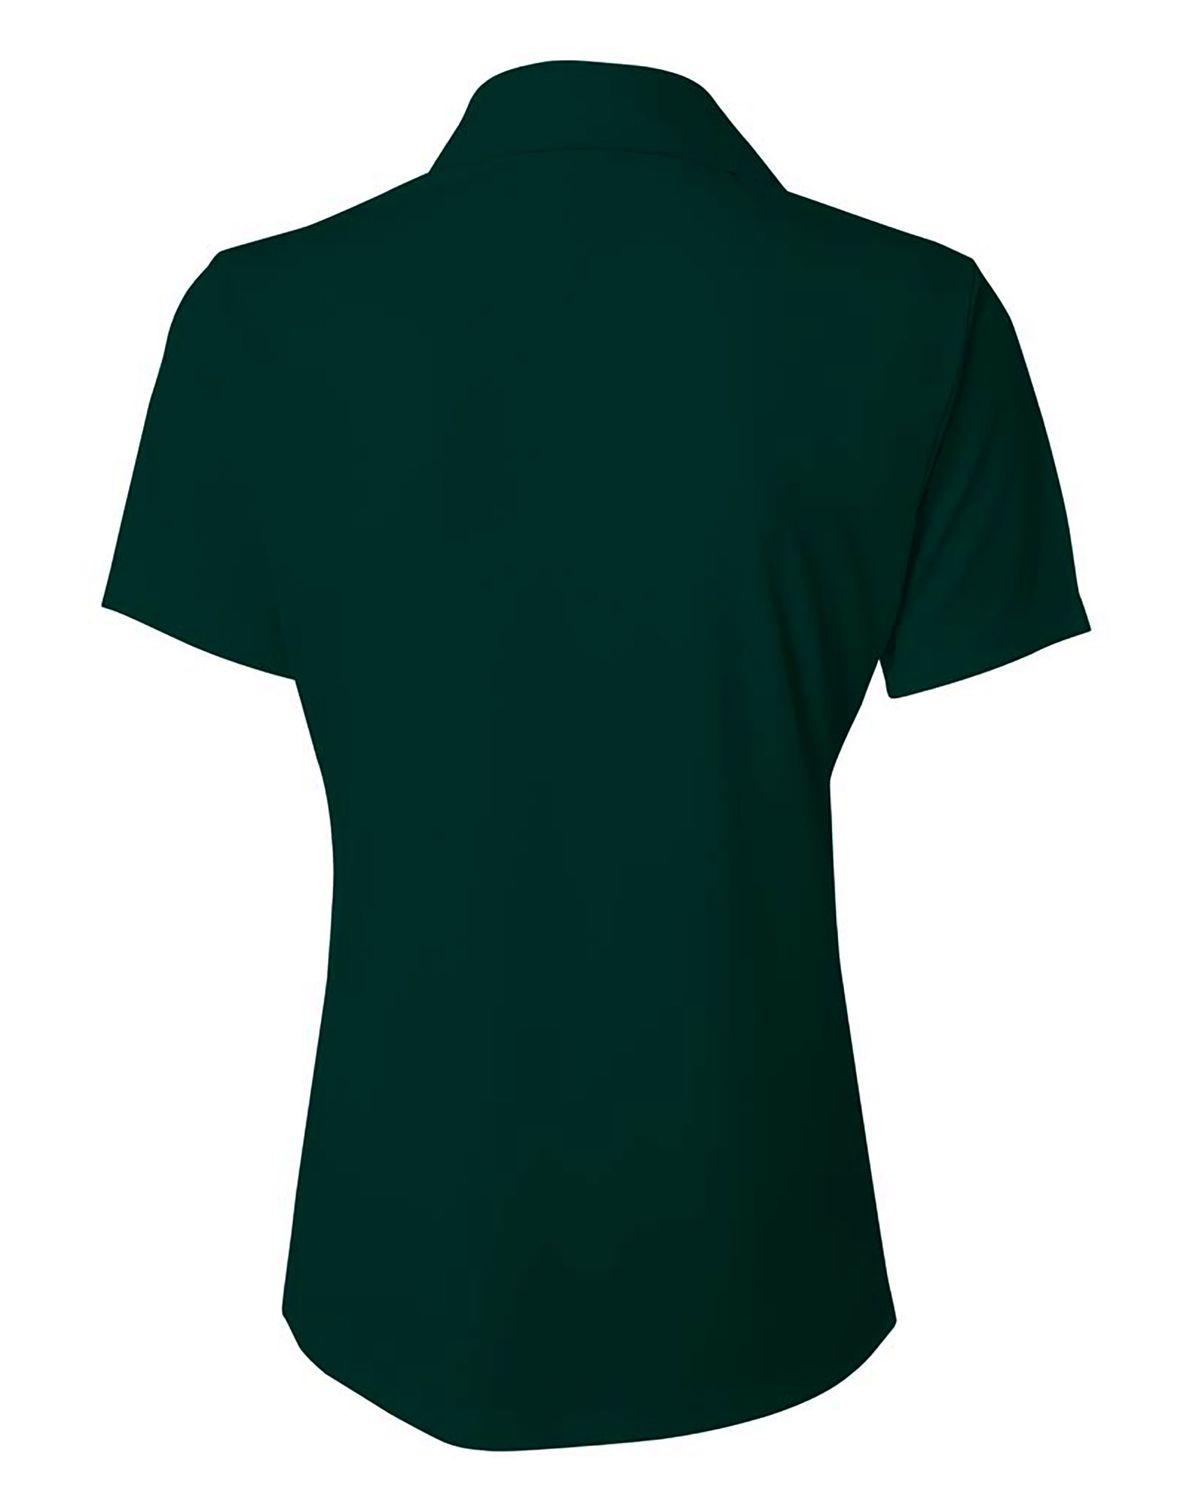 'A4 NW3261 Ladies Solid Interlock Polo'